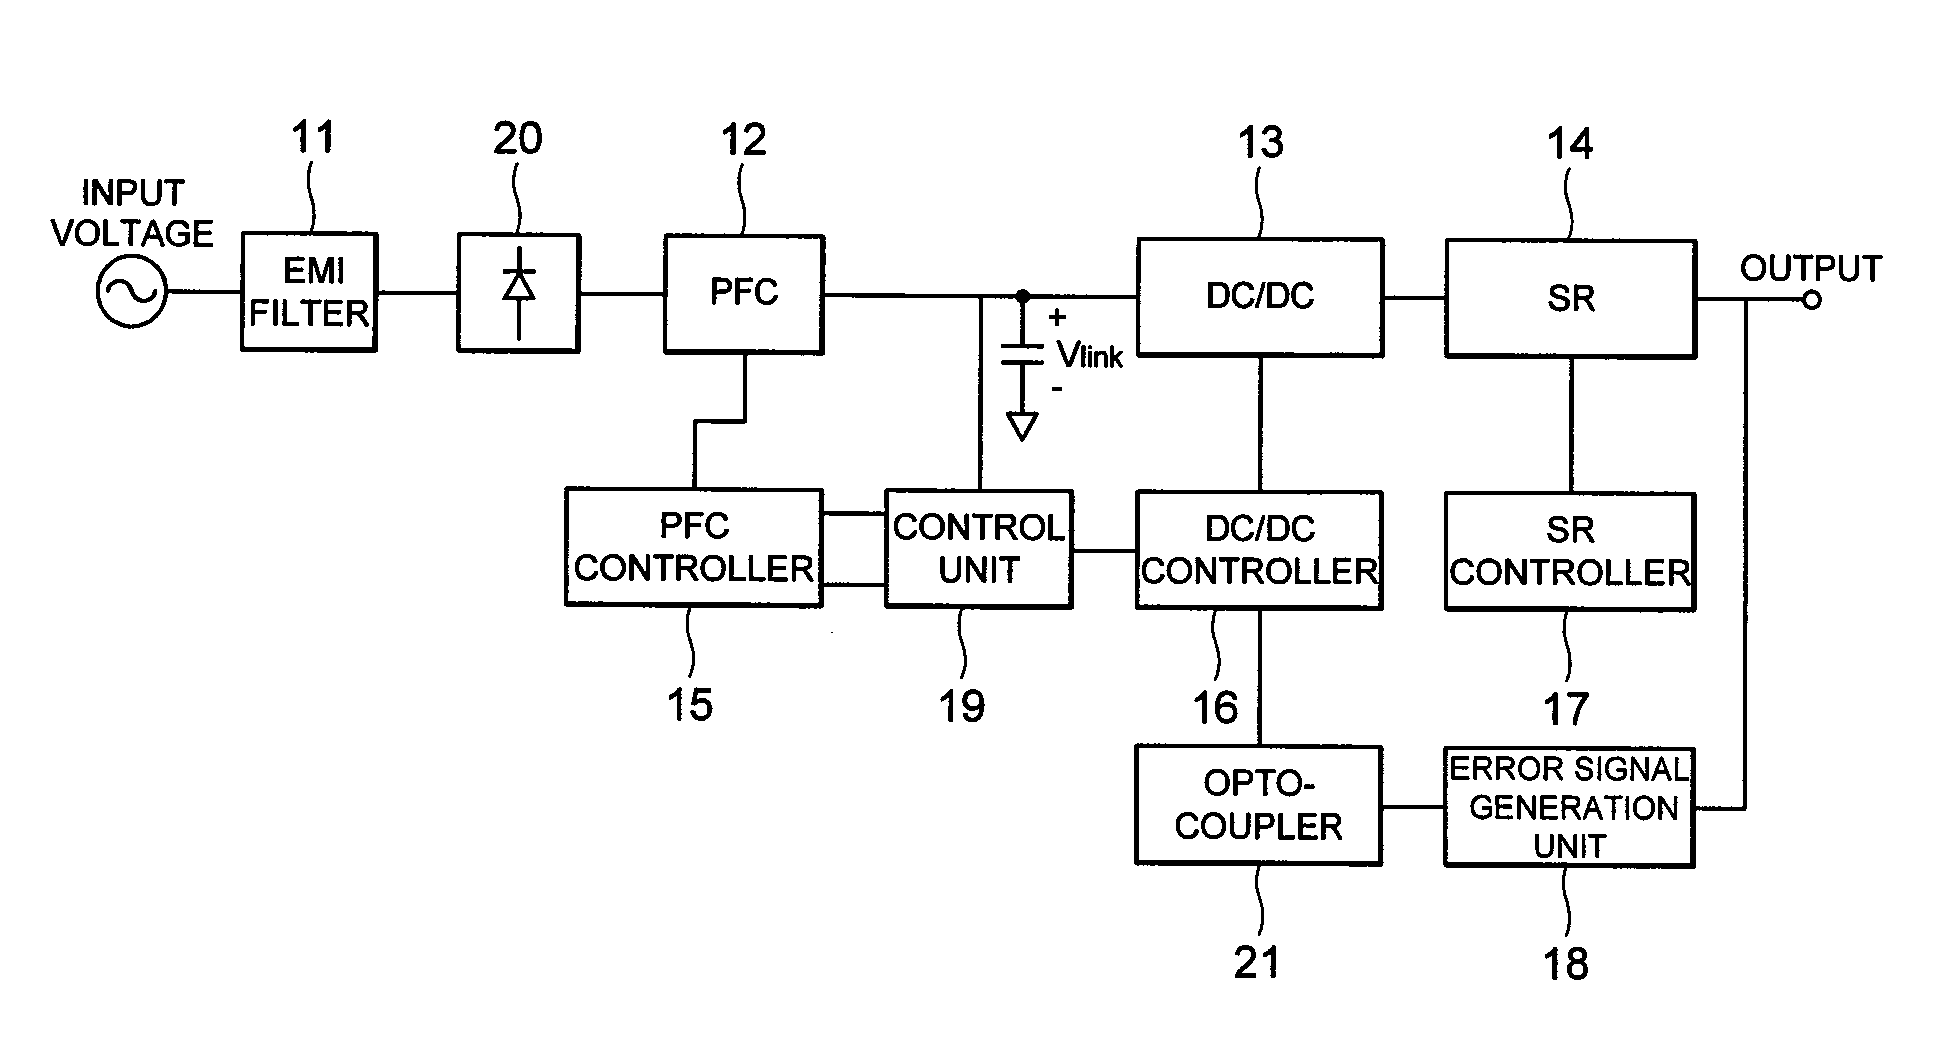 Switching mode power supply for reducing standby power